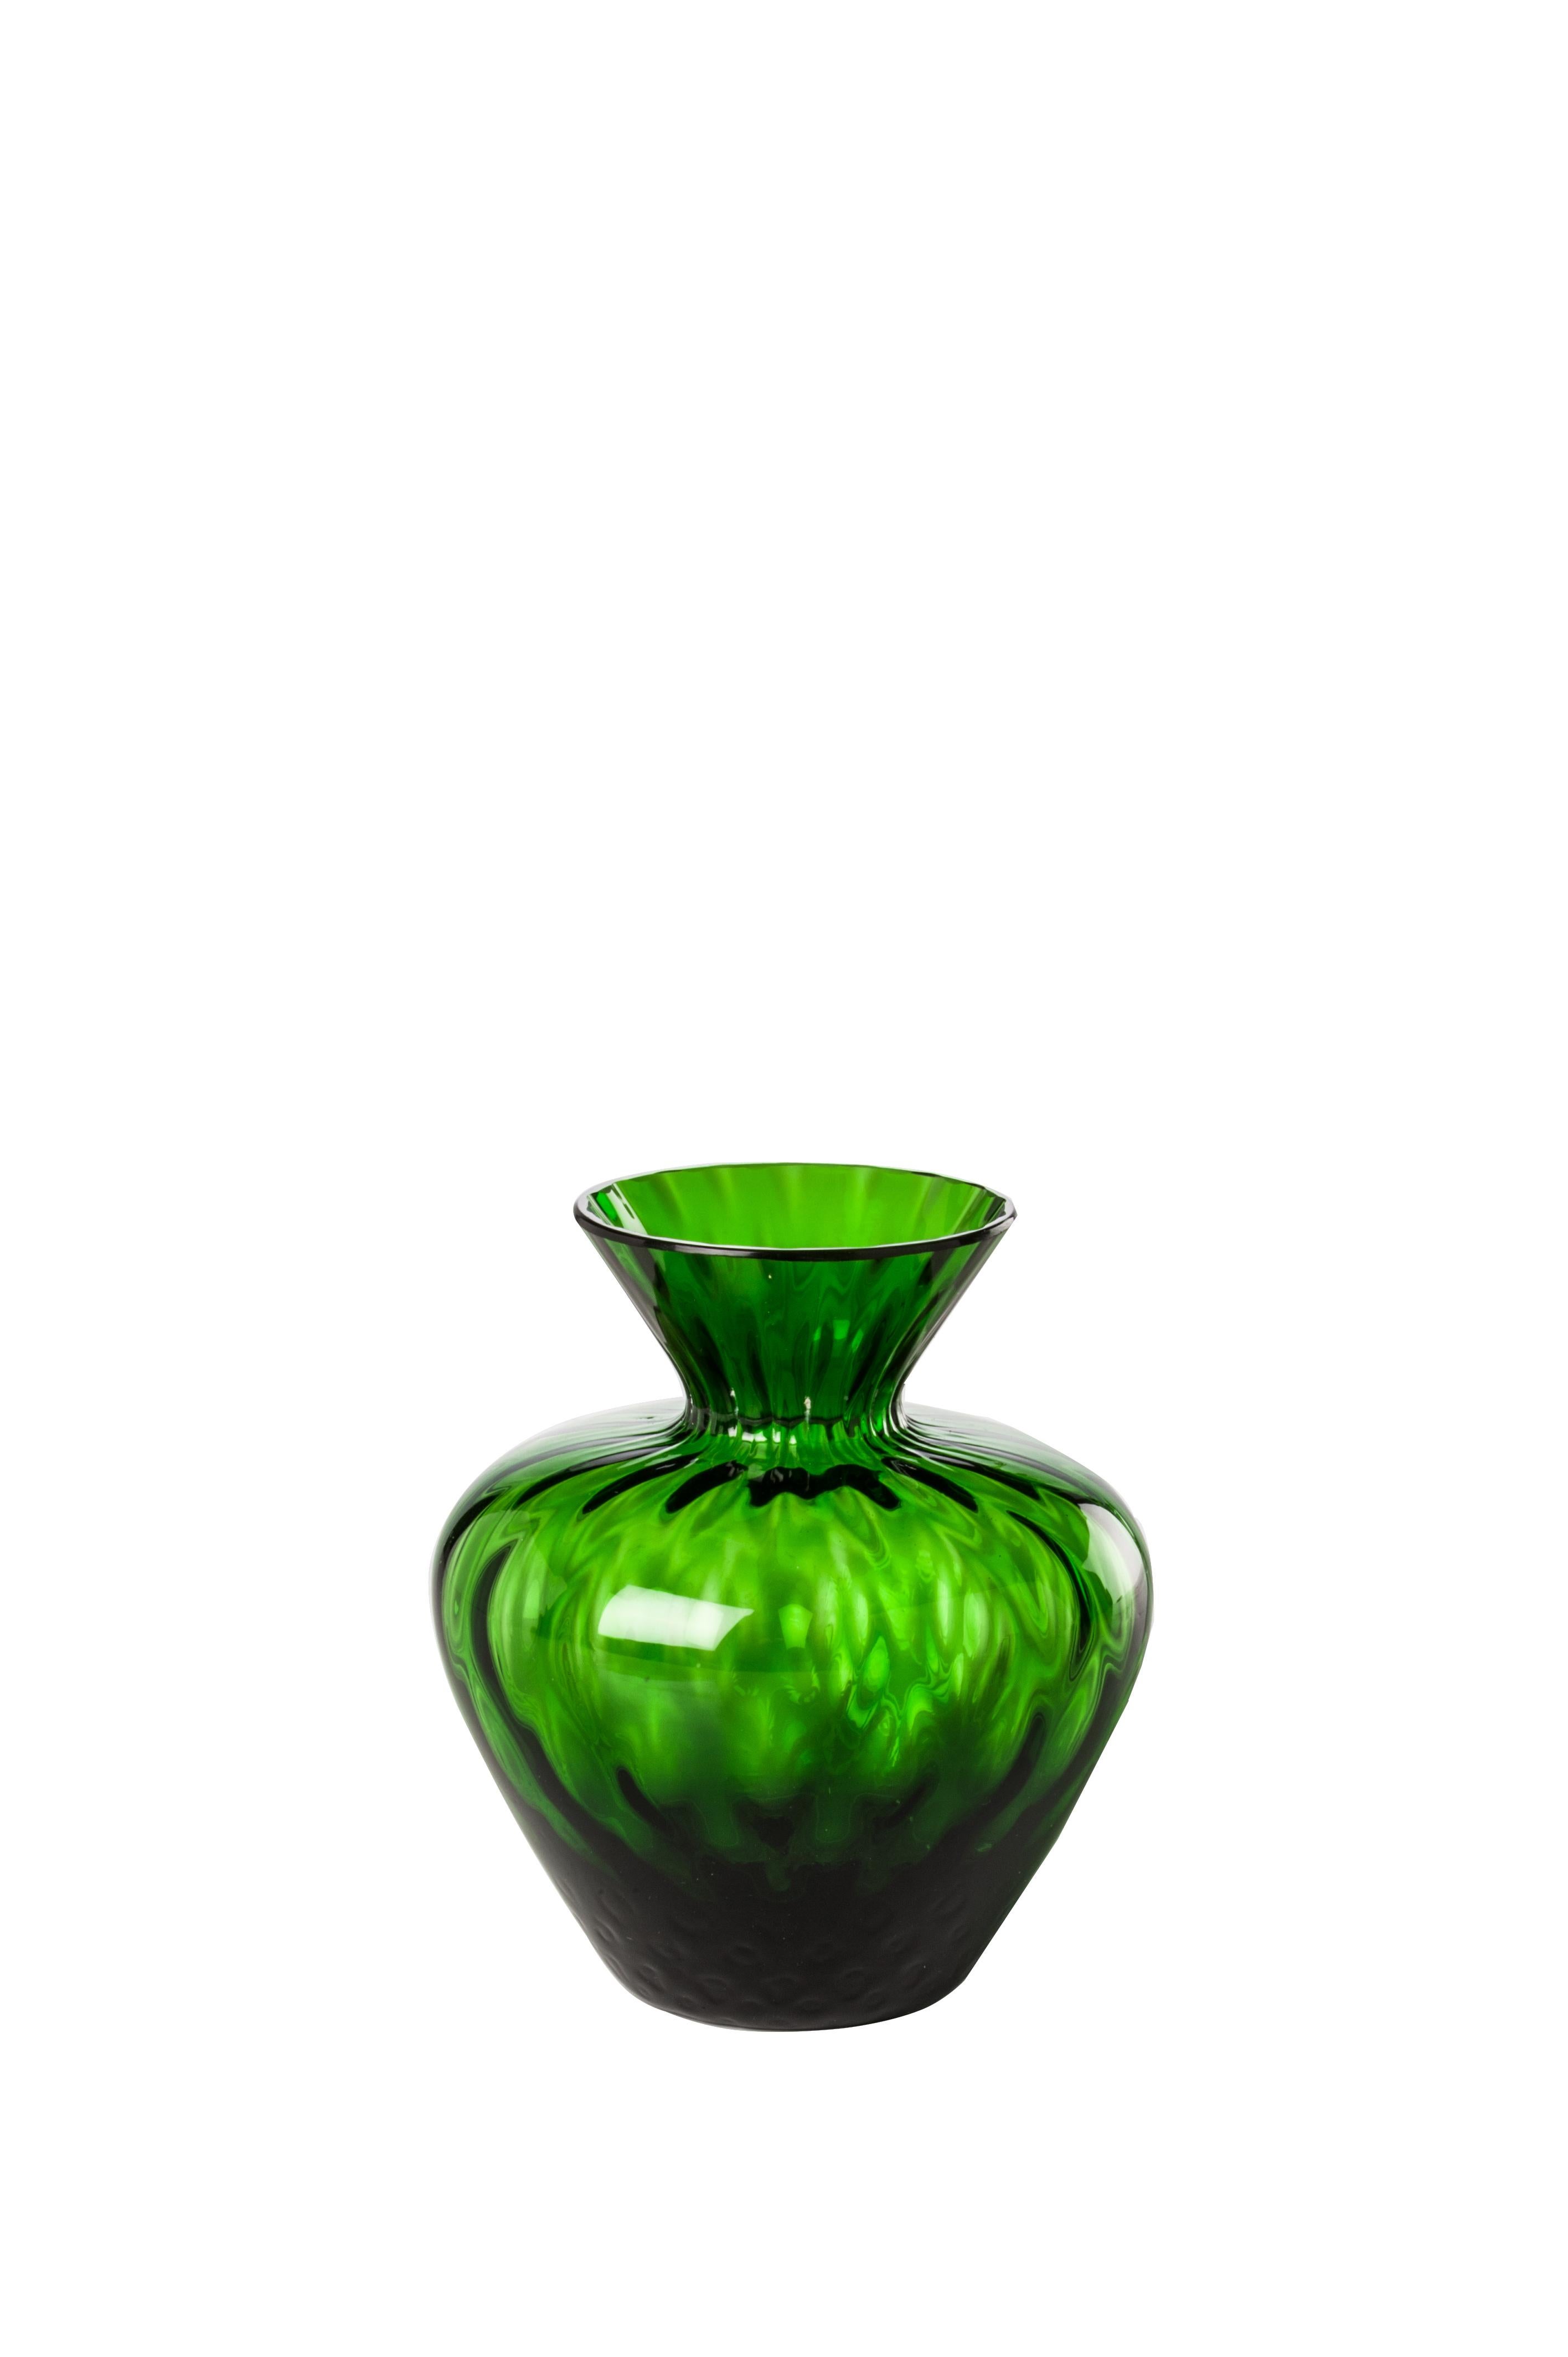 Venini glass vase with shaped body and neck in grass green designed in 2017. Perfect for indoor home decor as container or statement piece for any room. Also available in other colors on 1stdibs.

Dimensions: 9 cm diameter x 10 cm height.